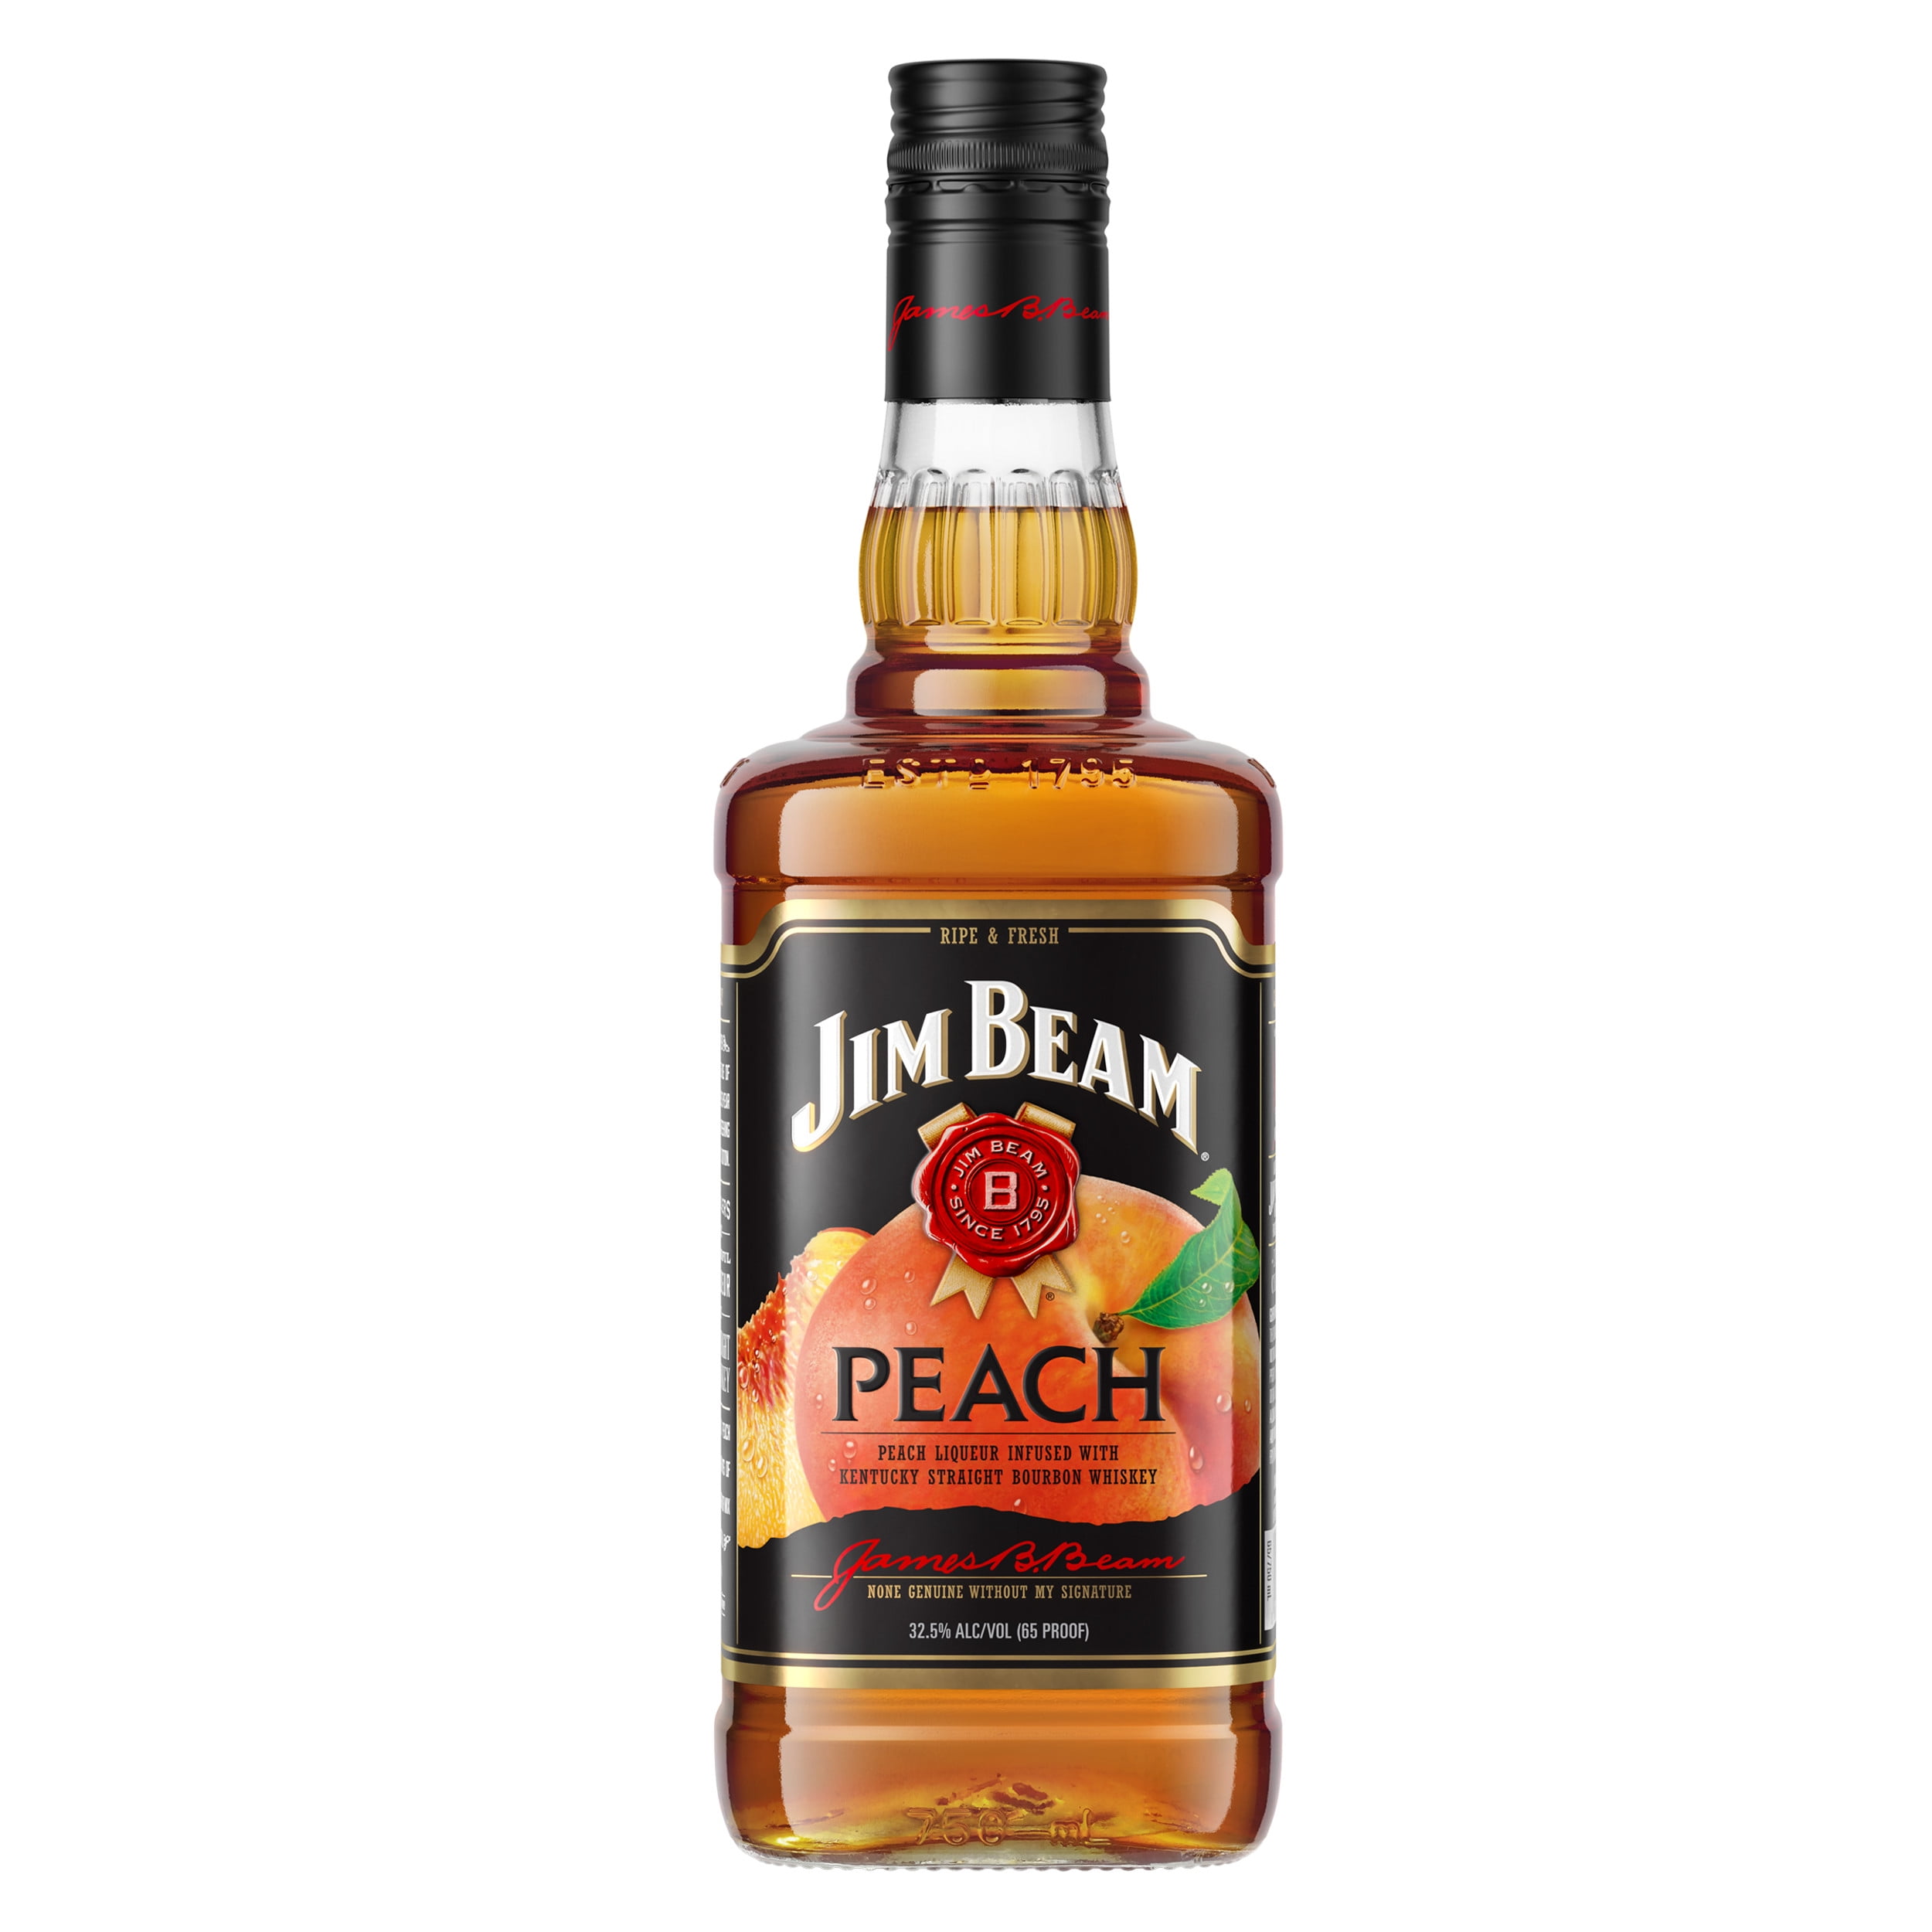 Jim Beam ABV Whiskey, ml Bottle, Flavored Bourbon Straight 750 Peach Infused 32.5